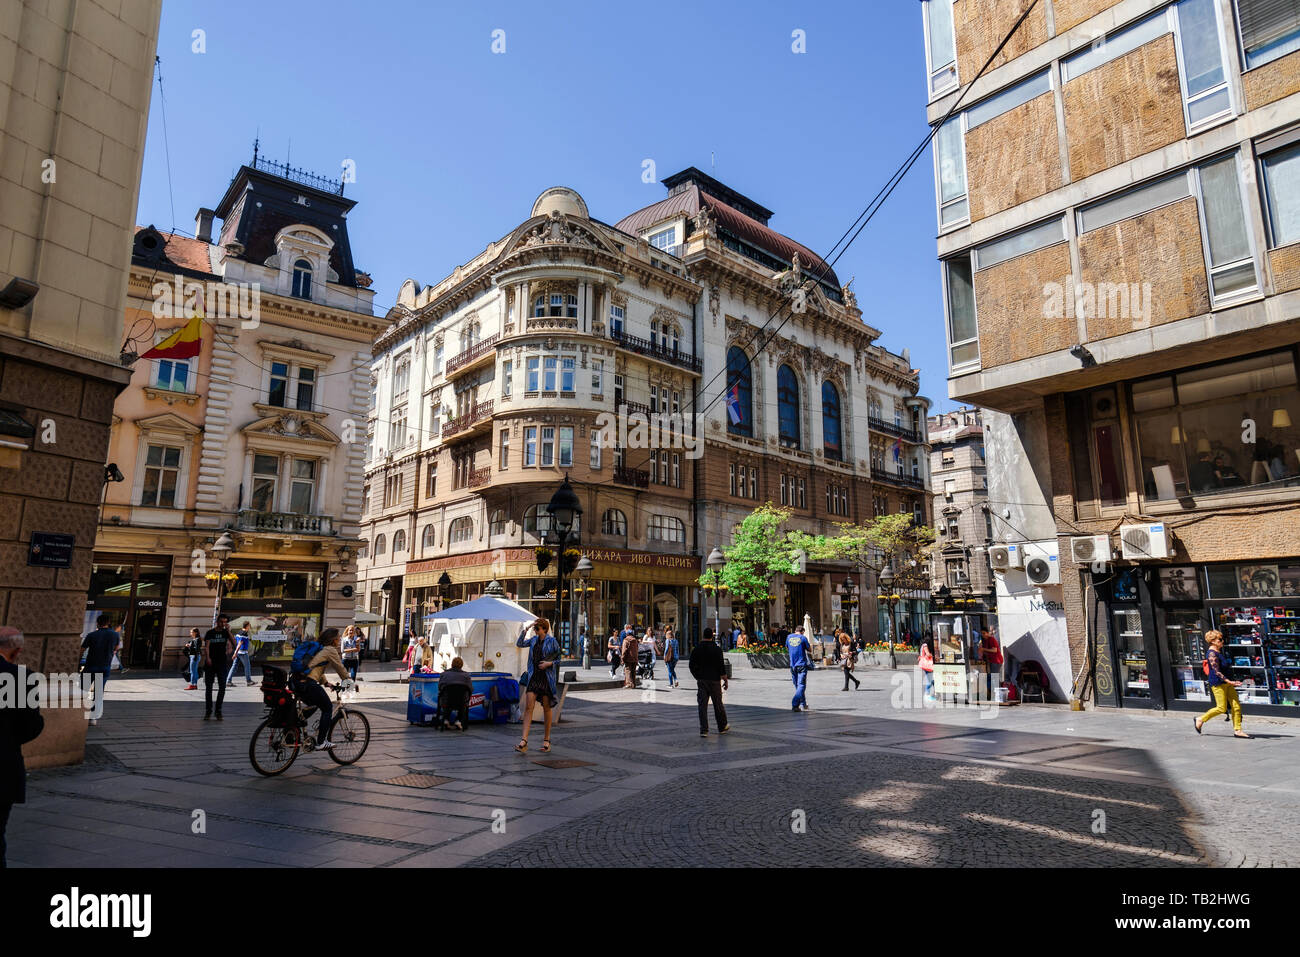 Belgrade, Serbia. April 19, 2018. People walking in Knez Mihailova street. City scene and old town with building facades, green trees, tourists and sp Stock Photo